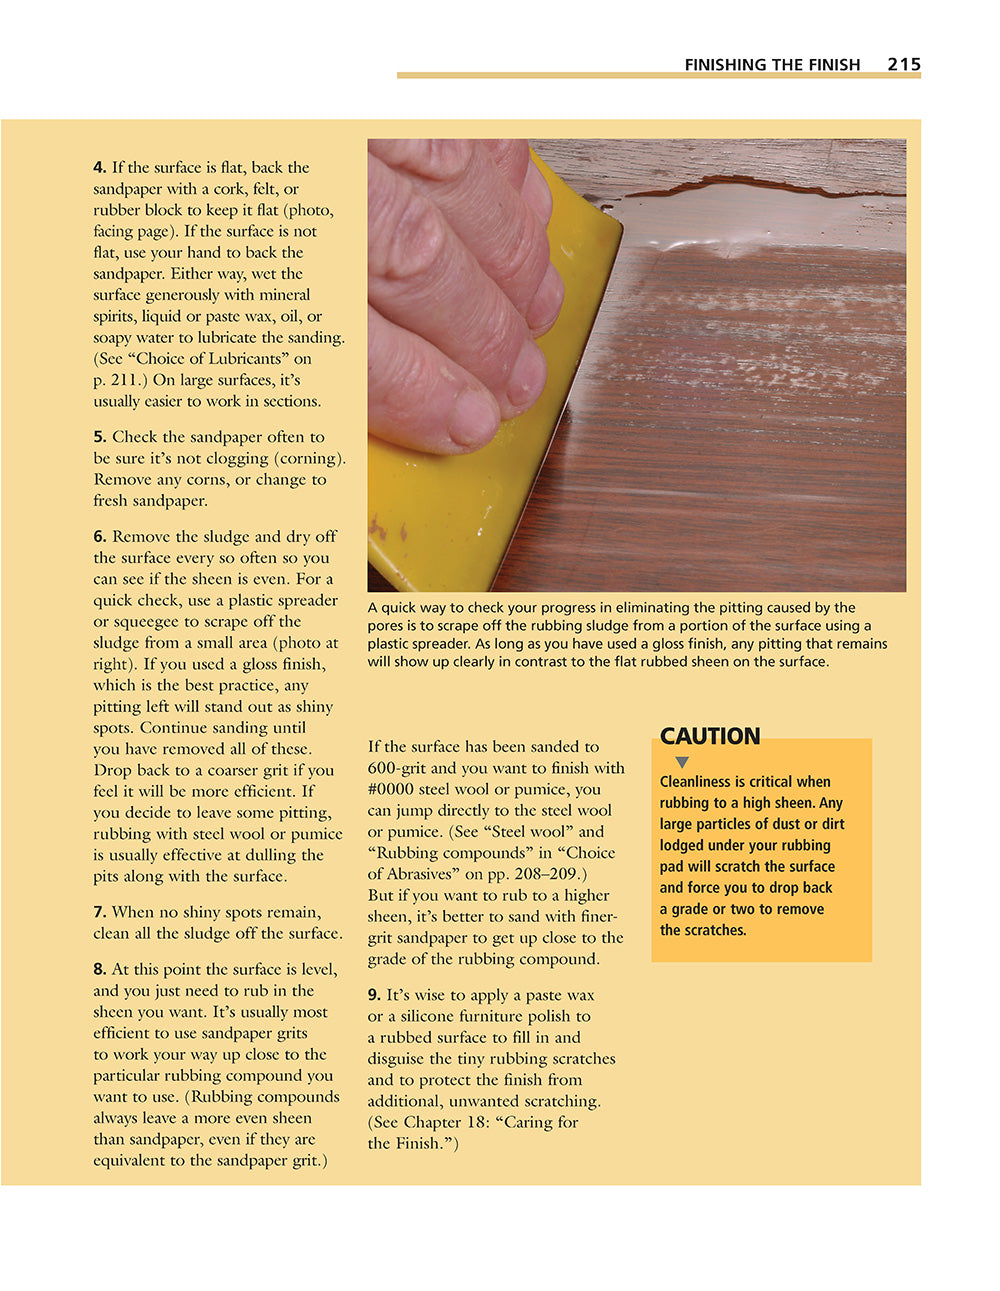 Understanding Wood Finishing, 3rd Revised Edition